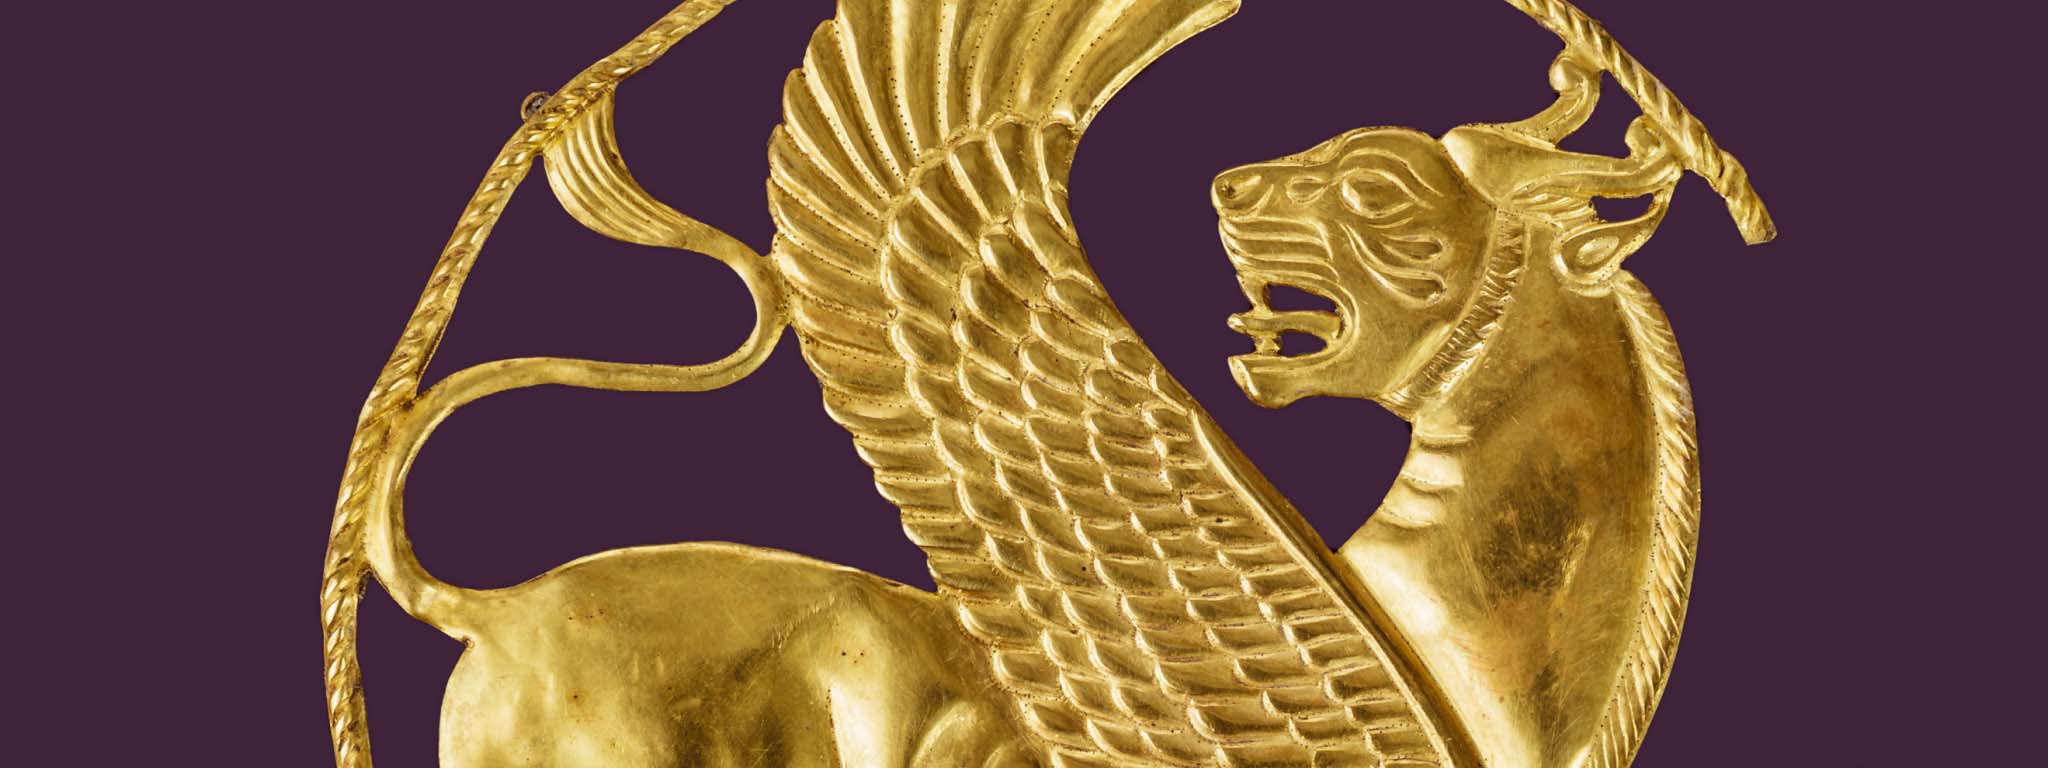 Plaque with a Winged Lion-Griffin (detail), Achaemenid, 500–330 BC. Gold. Courtesy of the Oriental Institute of the University of Chicago, A28582